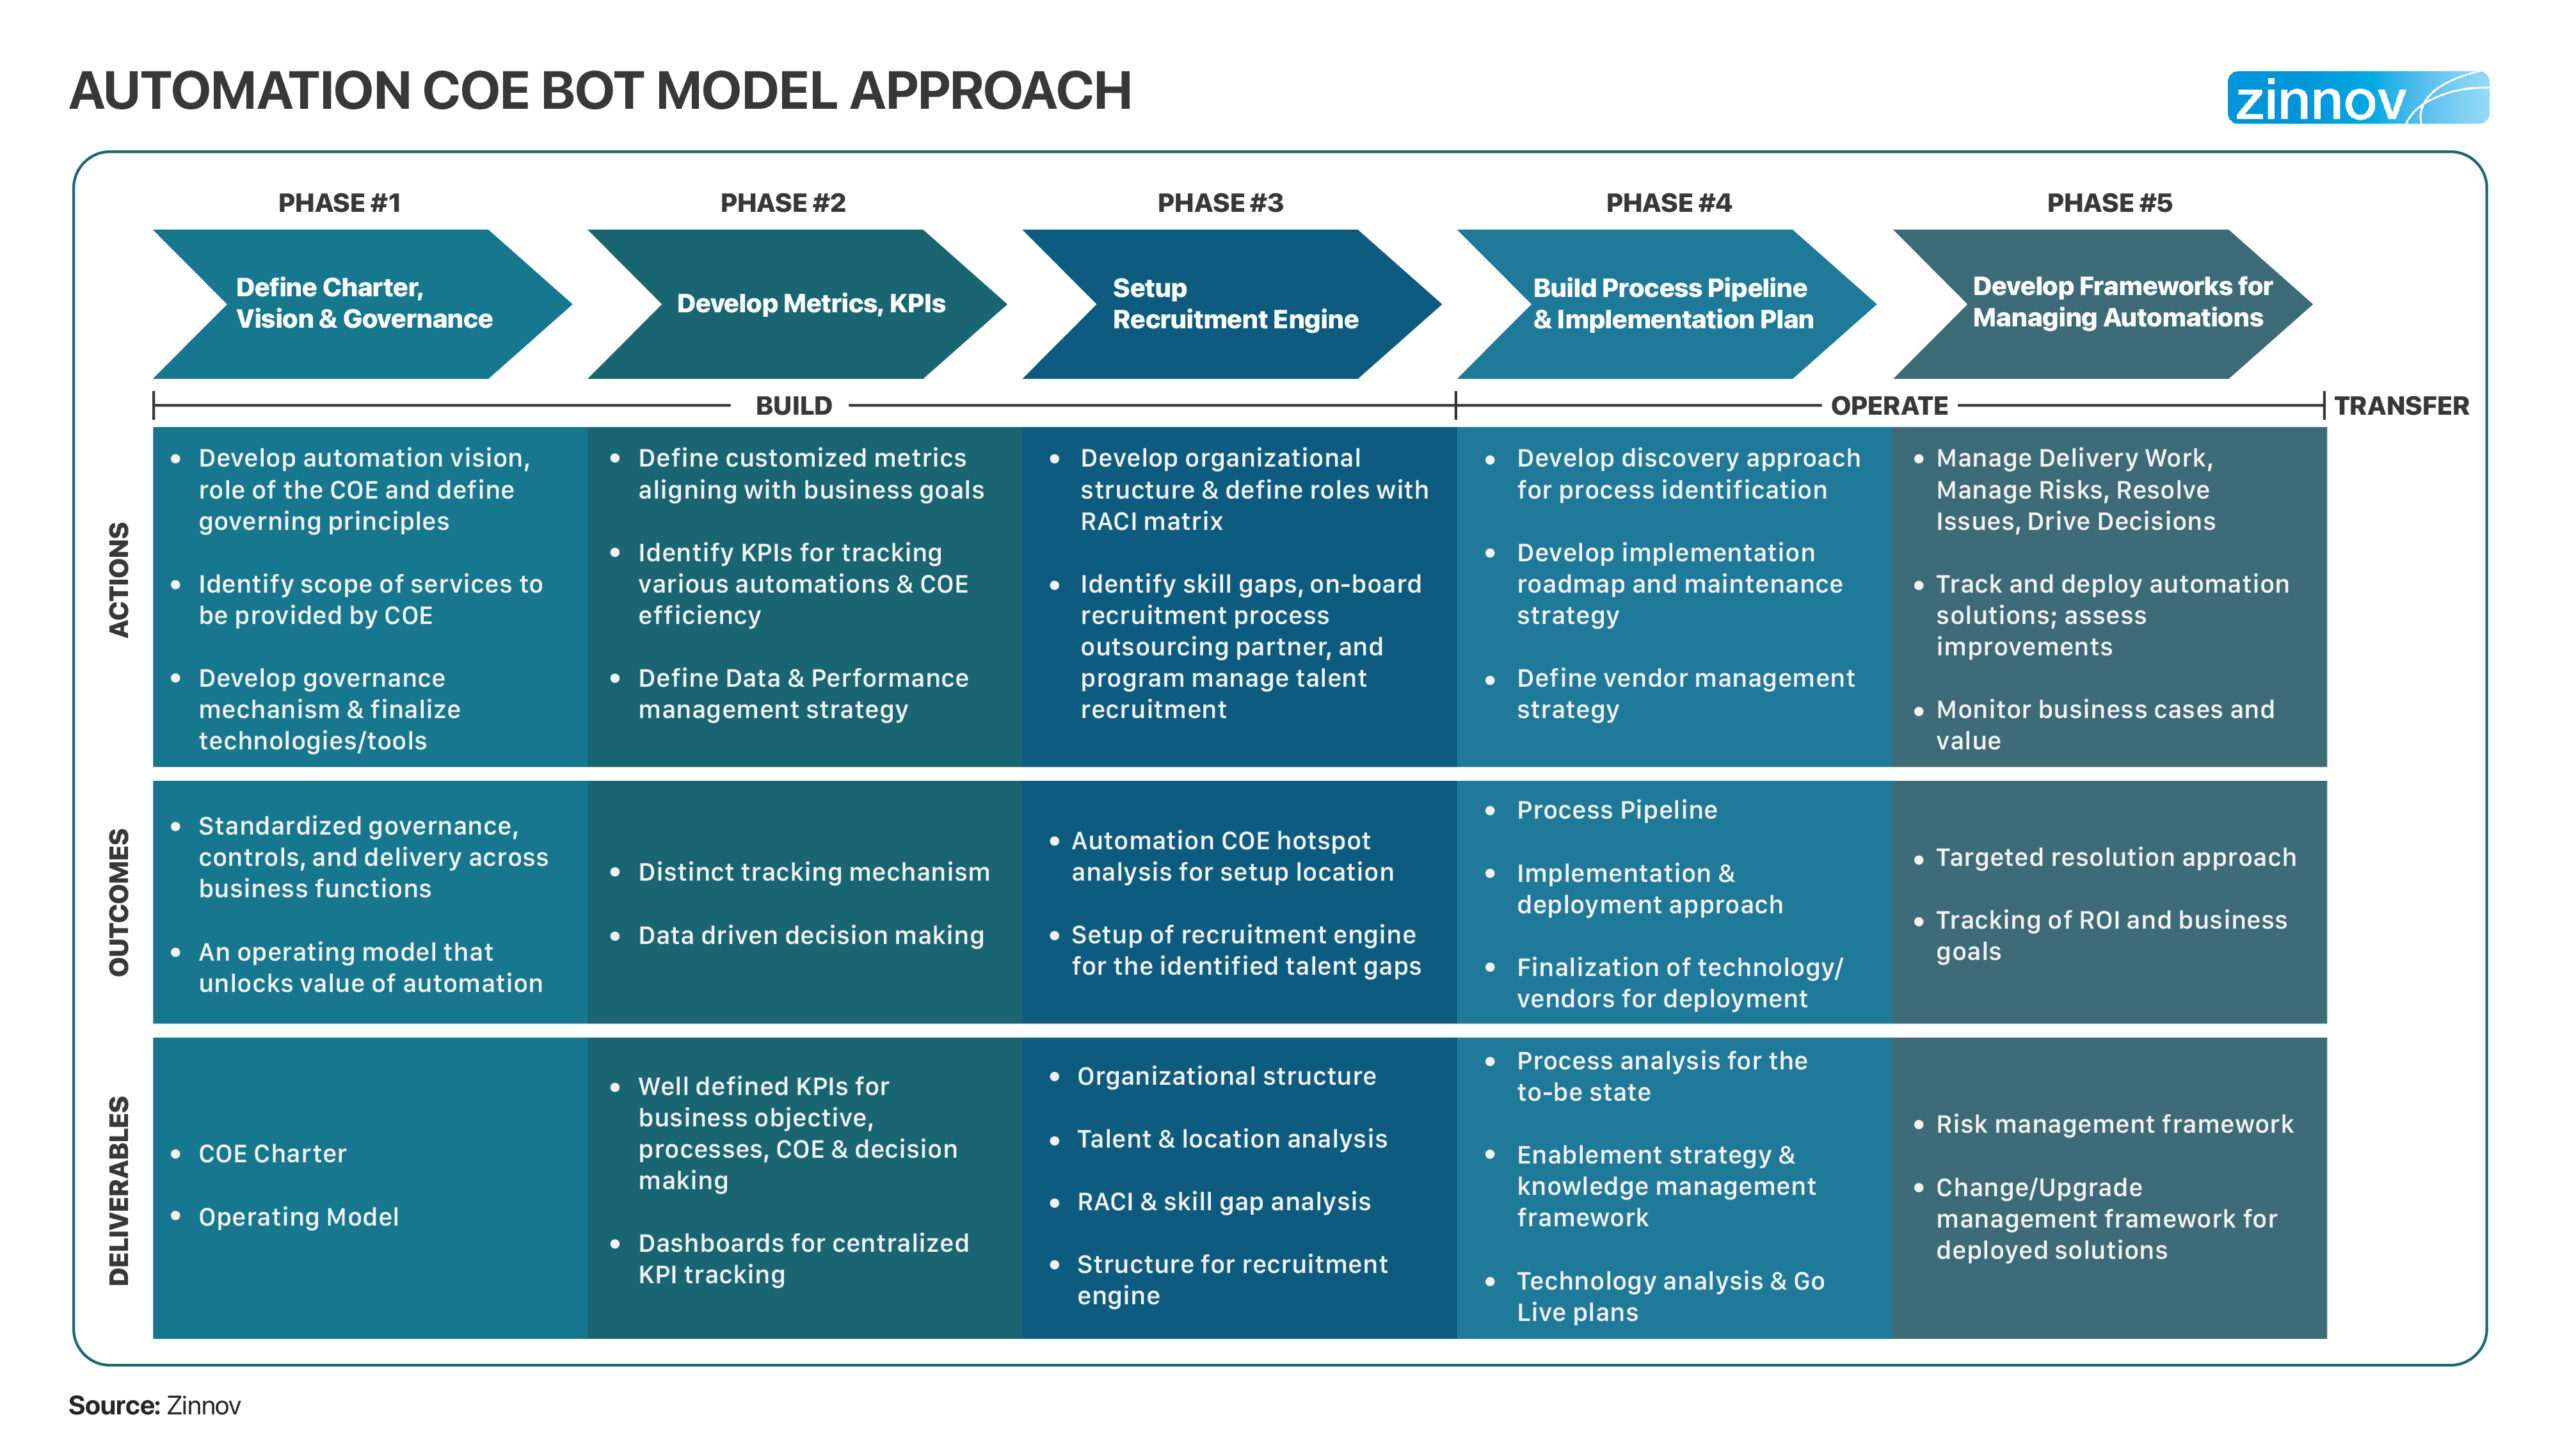 Automation COE Build Operate Transfer Model approach